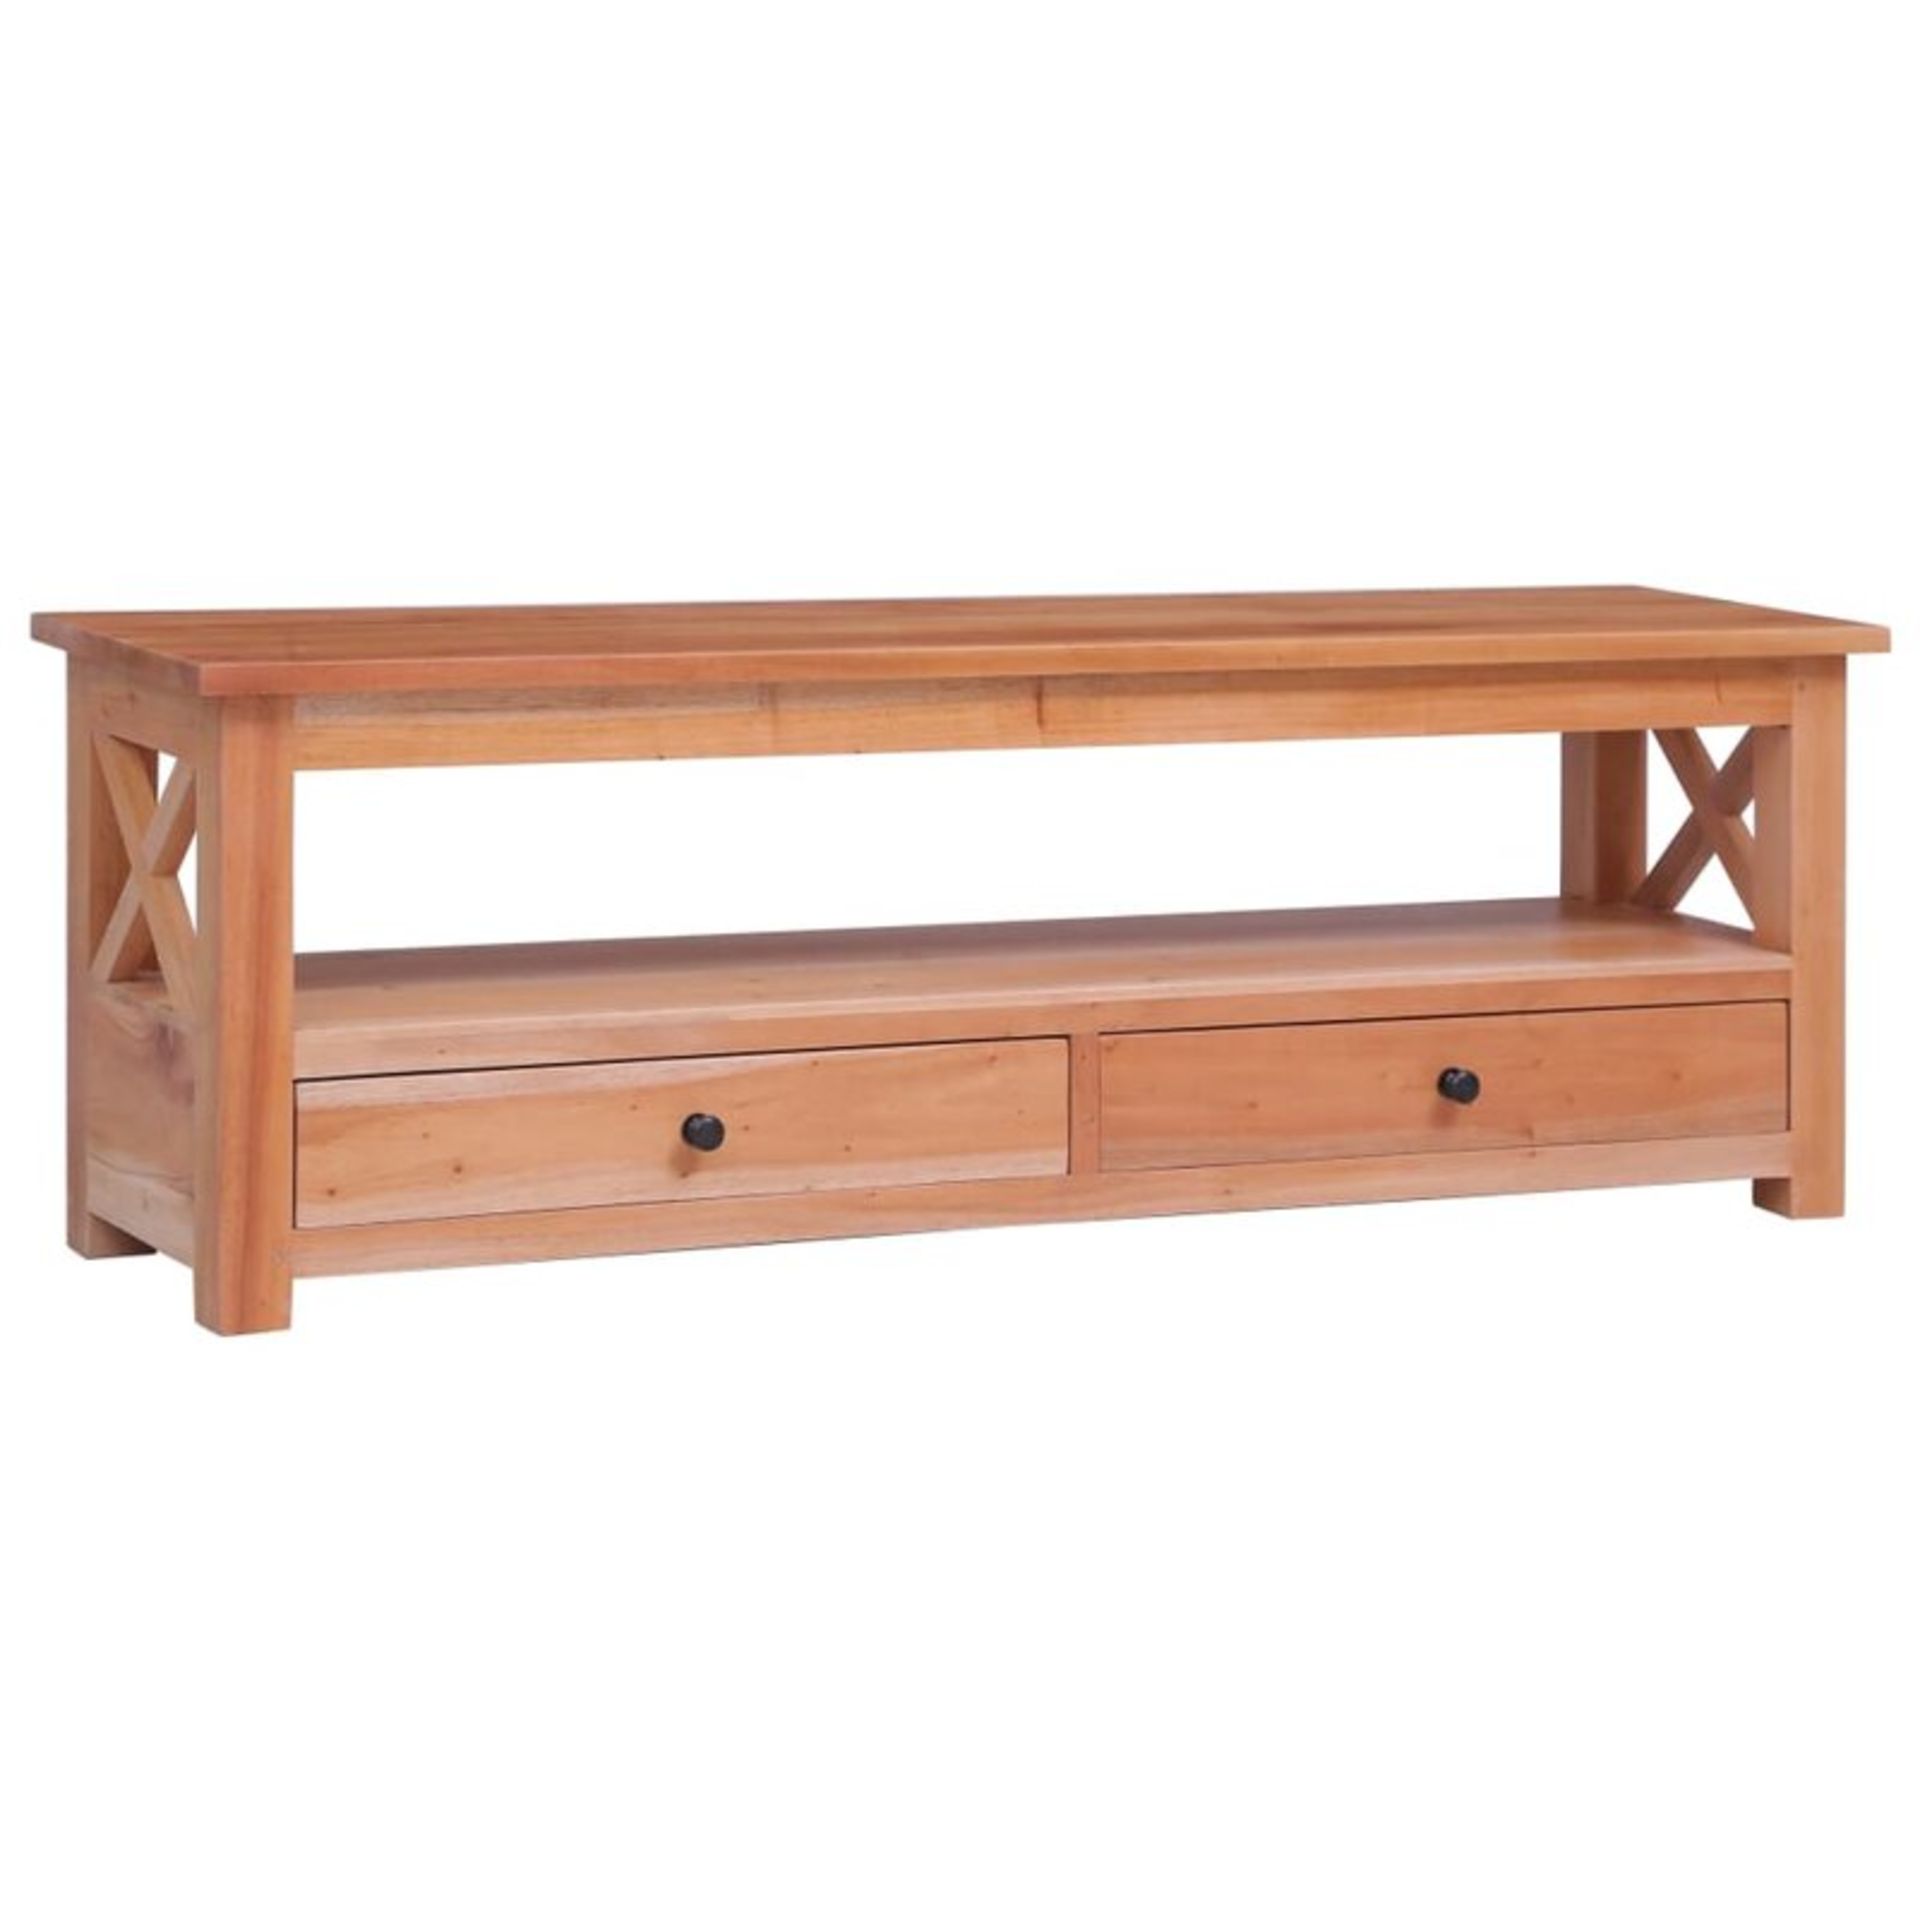 Hinkson Solid Wood TV Stand for TVs up to 50" - RRP £197.99. - Image 3 of 5